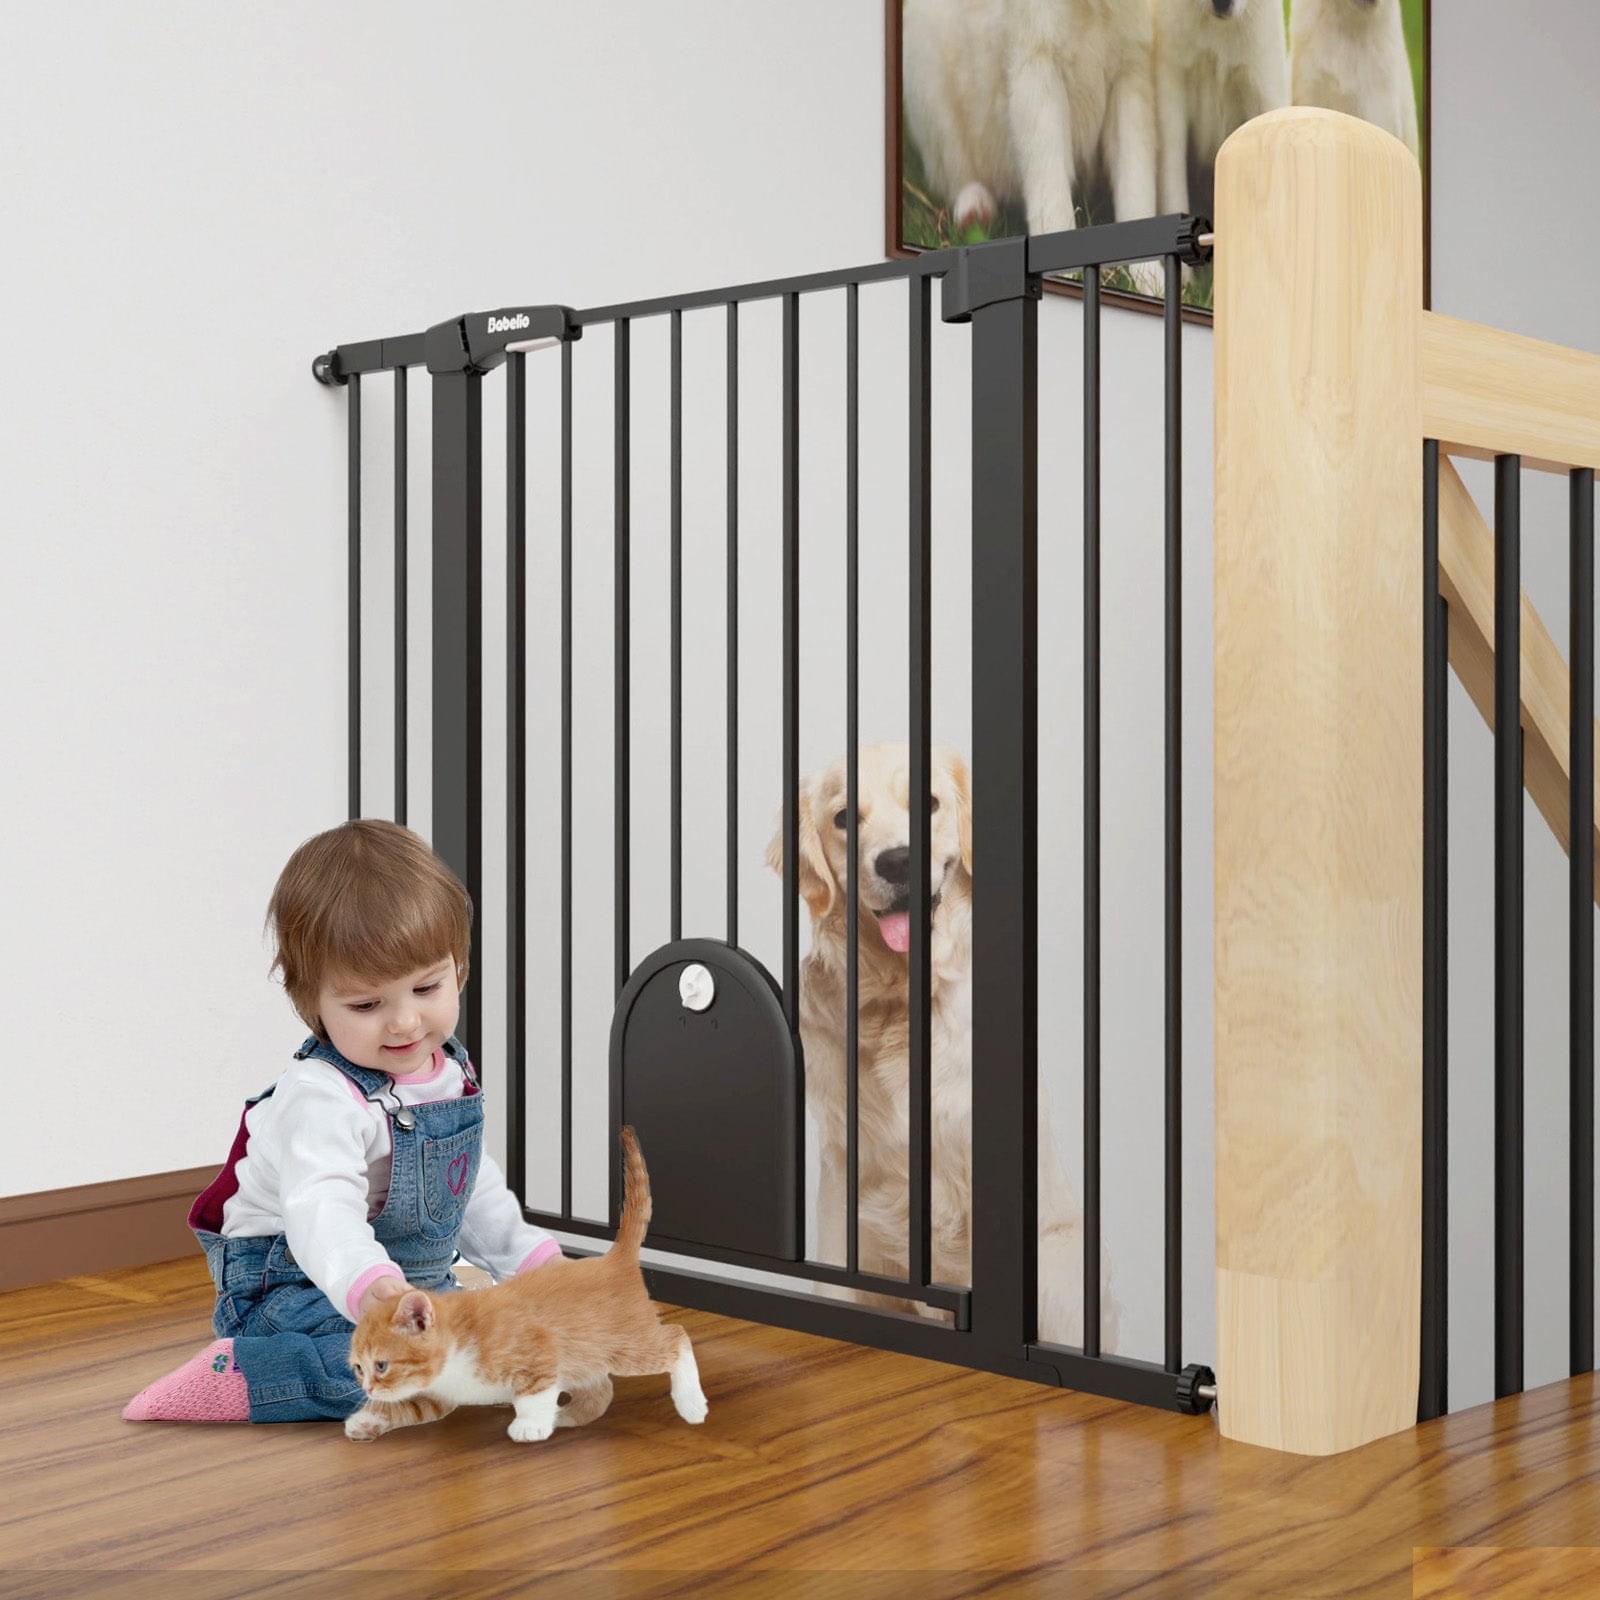 Babelio 36" Tall Auto Close Baby Gate with Small Cat Door, 29-43" Metal Cat Gate for Doorway, Stairs, House, White - babeliobaby